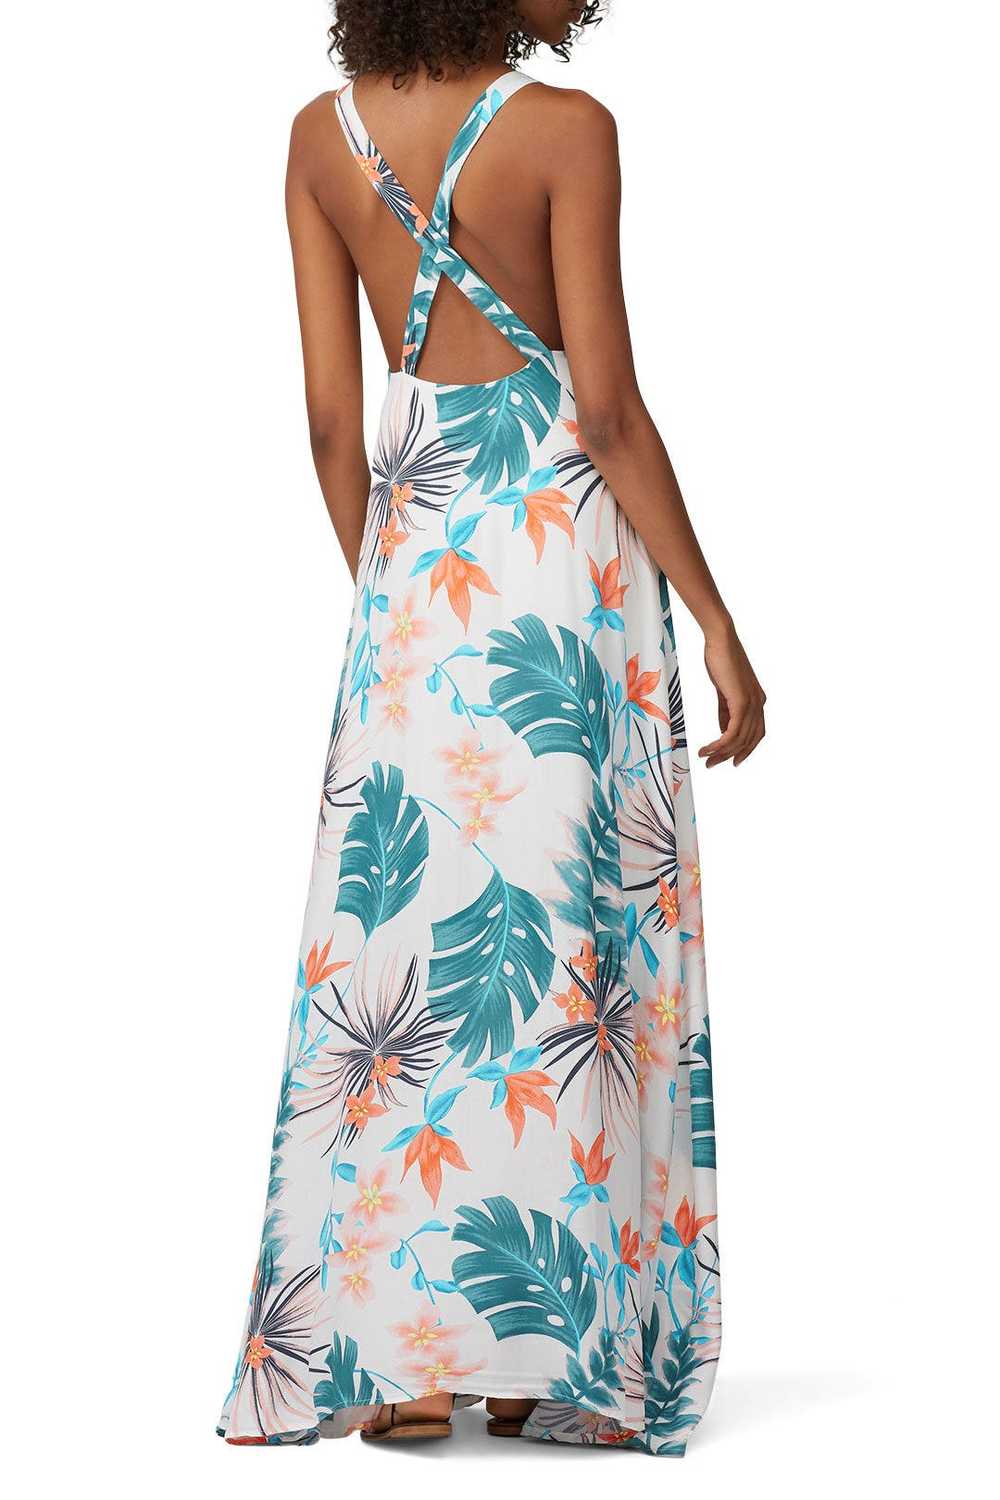 Slate & Willow Palm Printed Maxi - image 3